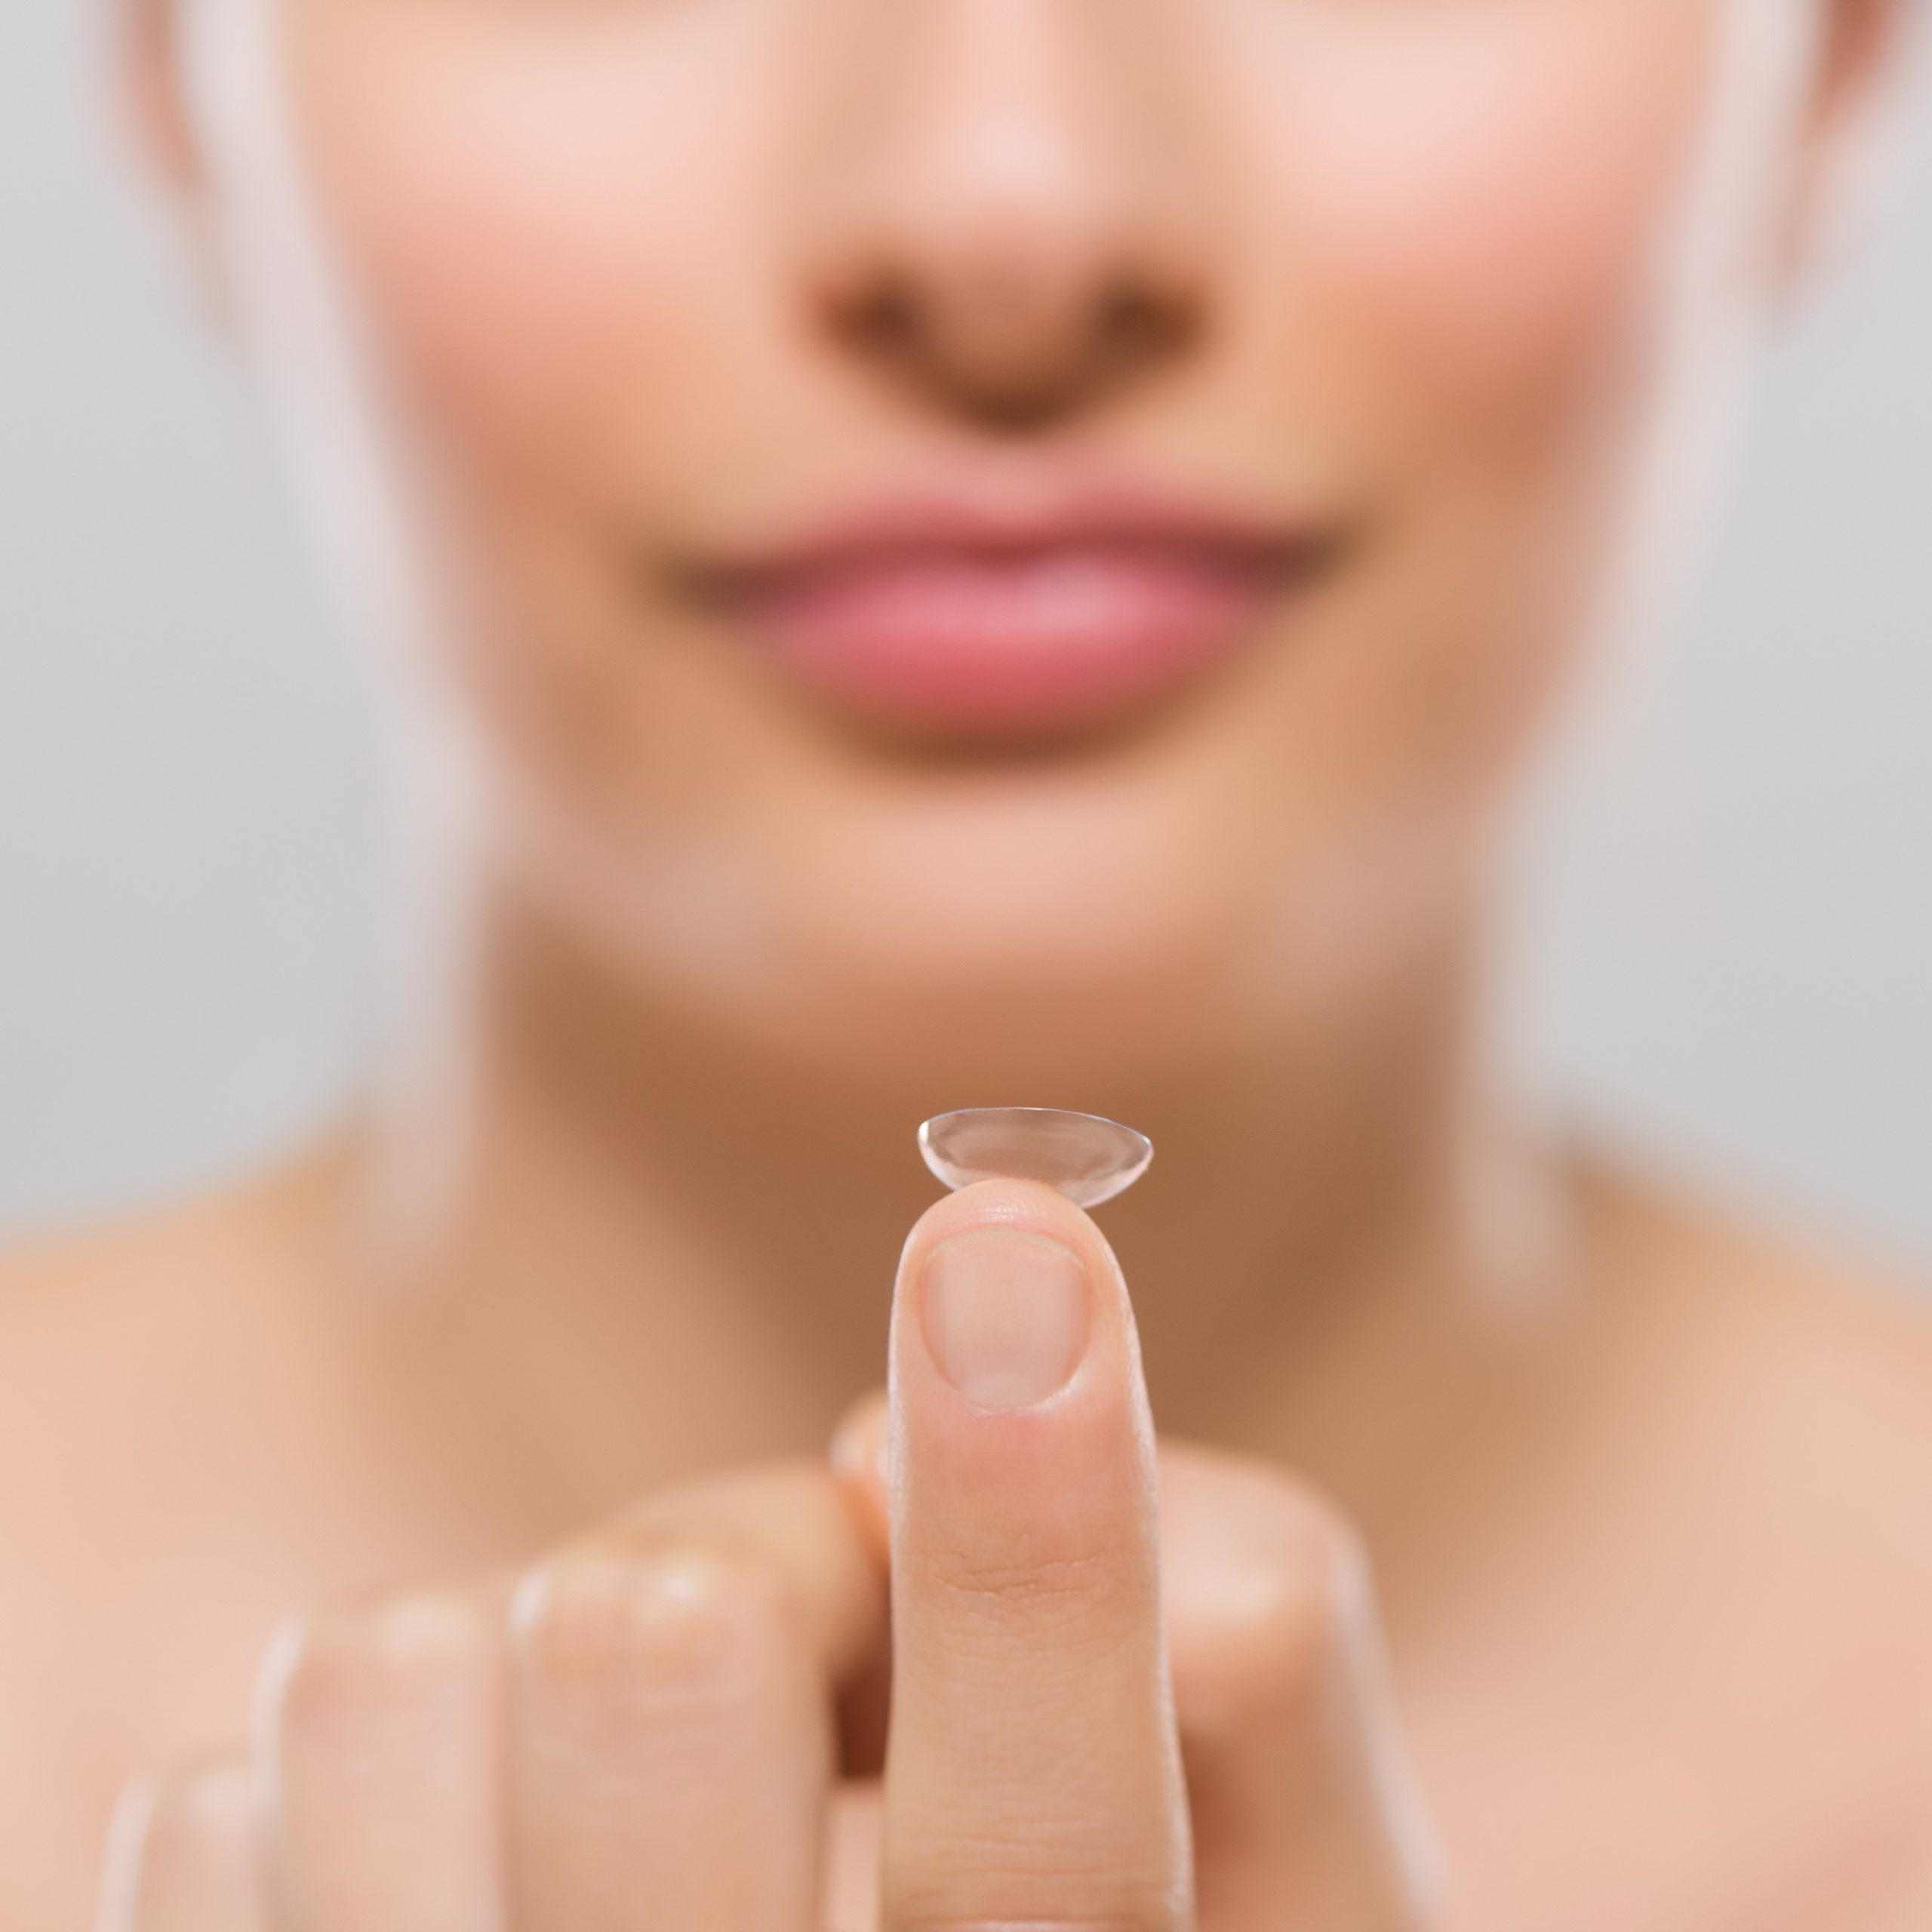 Woman holding contact lens